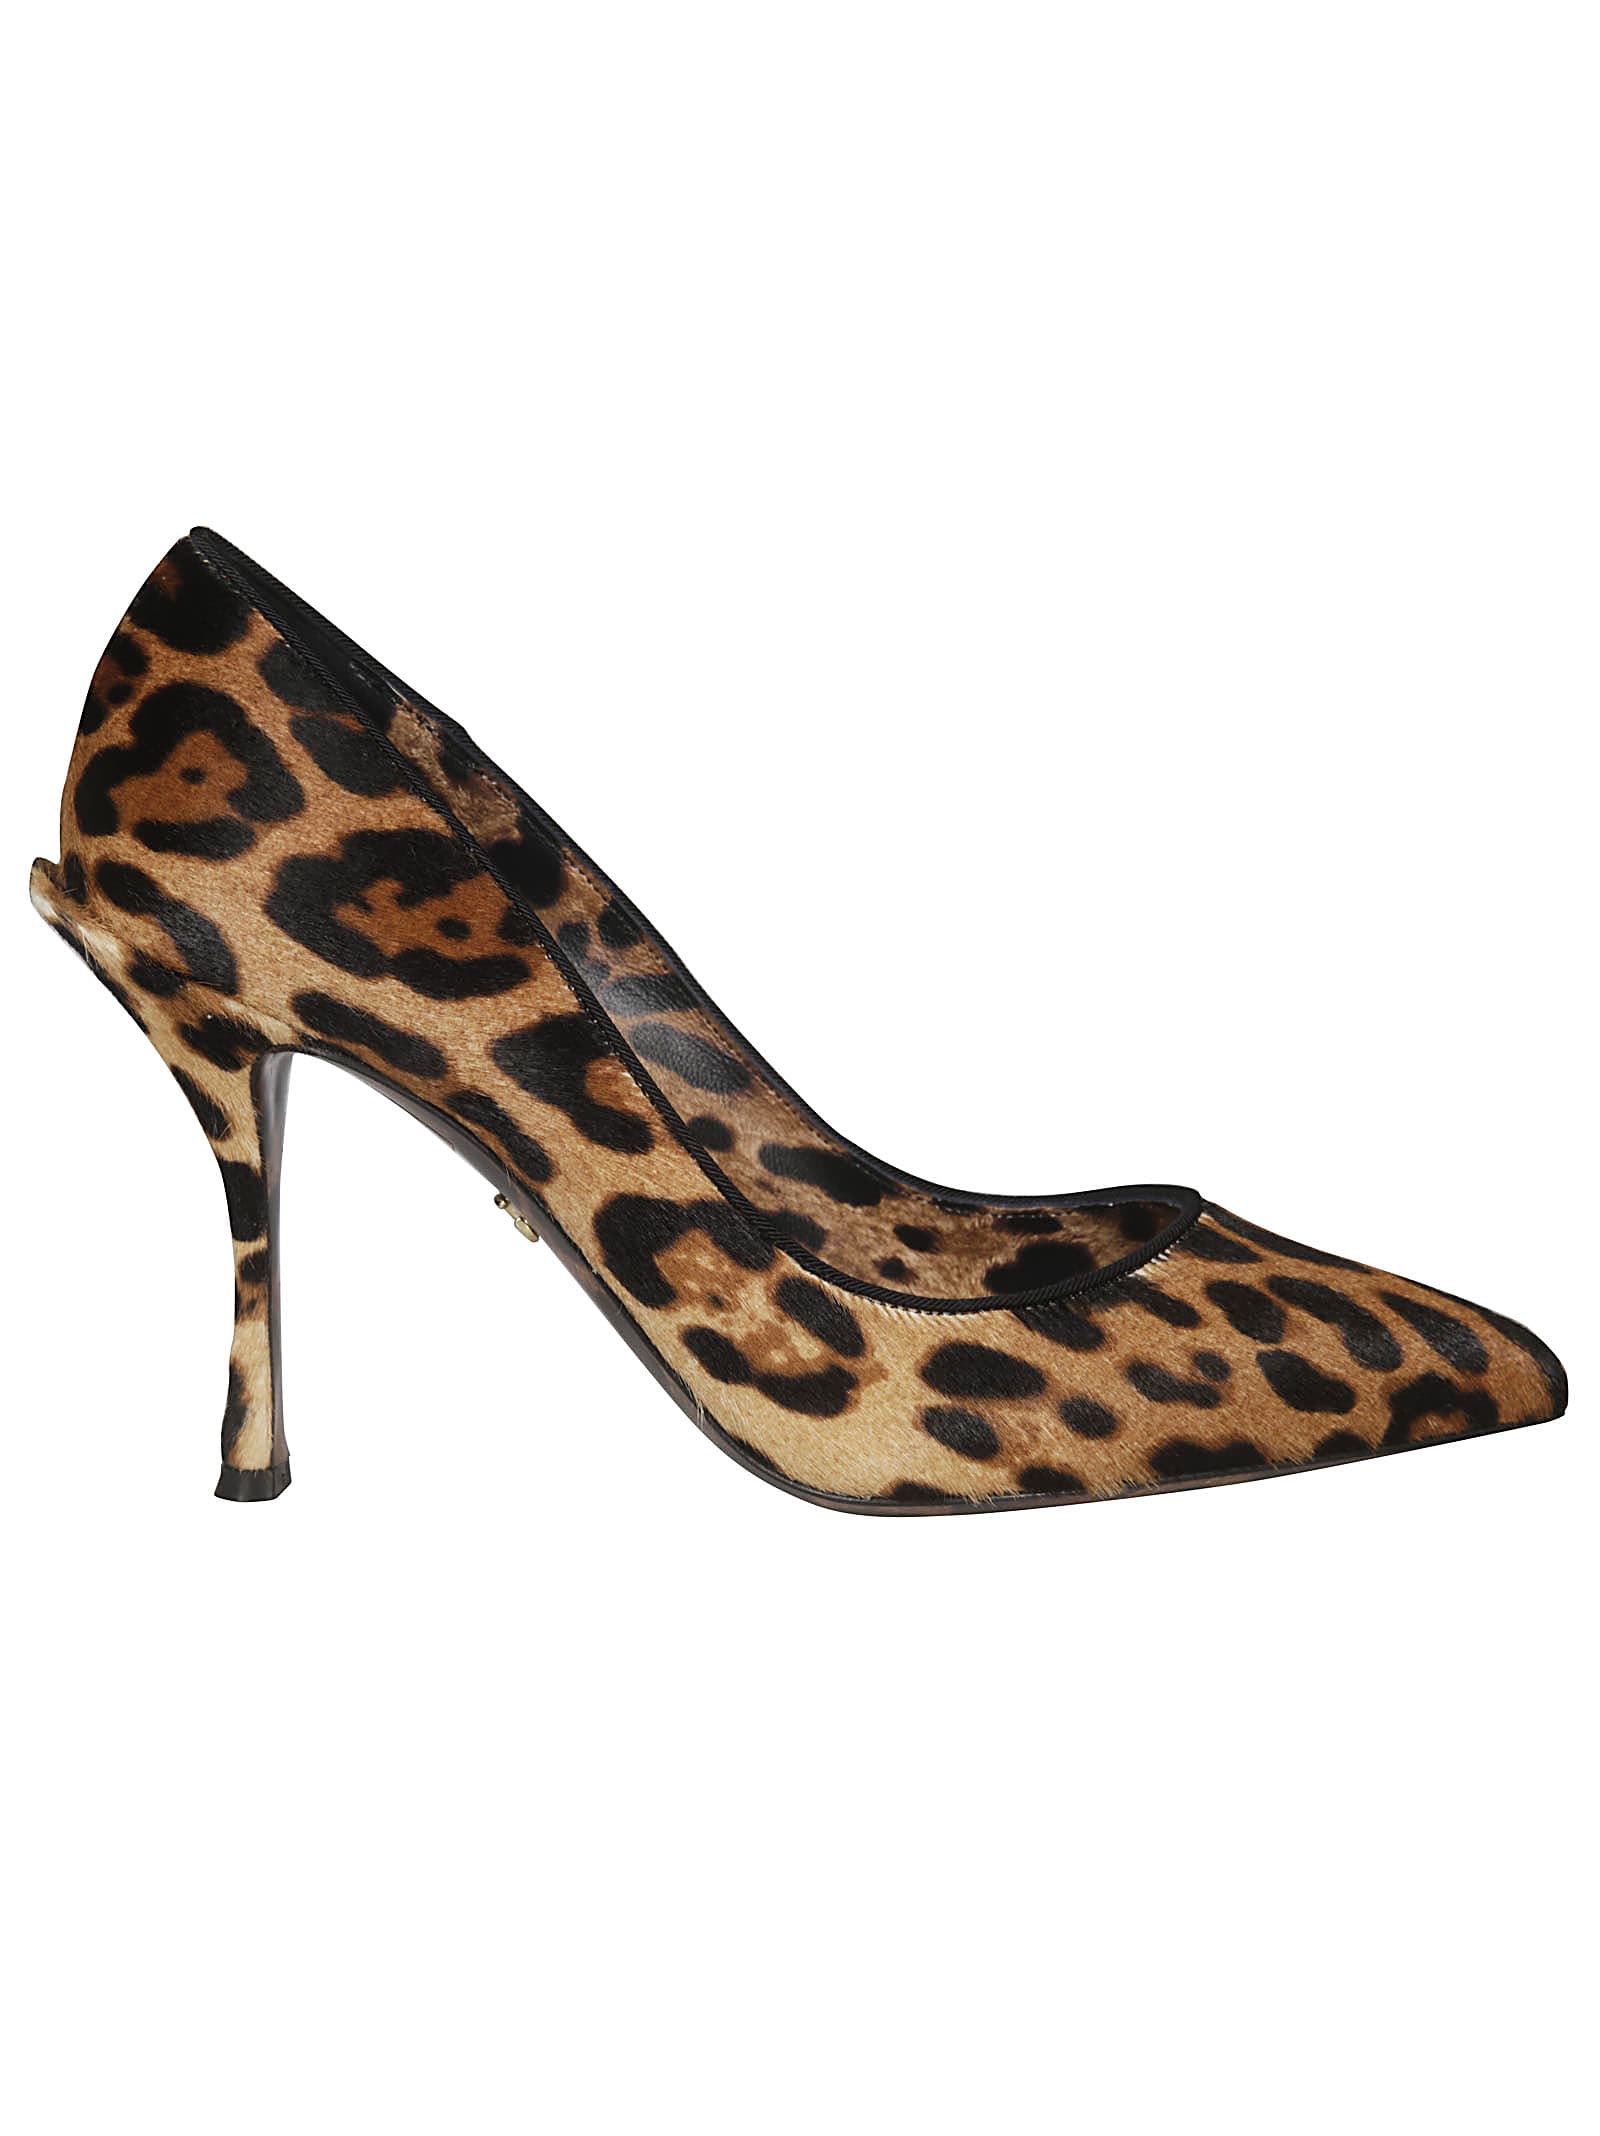 Buy Dolce & Gabbana Printed Pumps online, shop Dolce & Gabbana shoes with free shipping